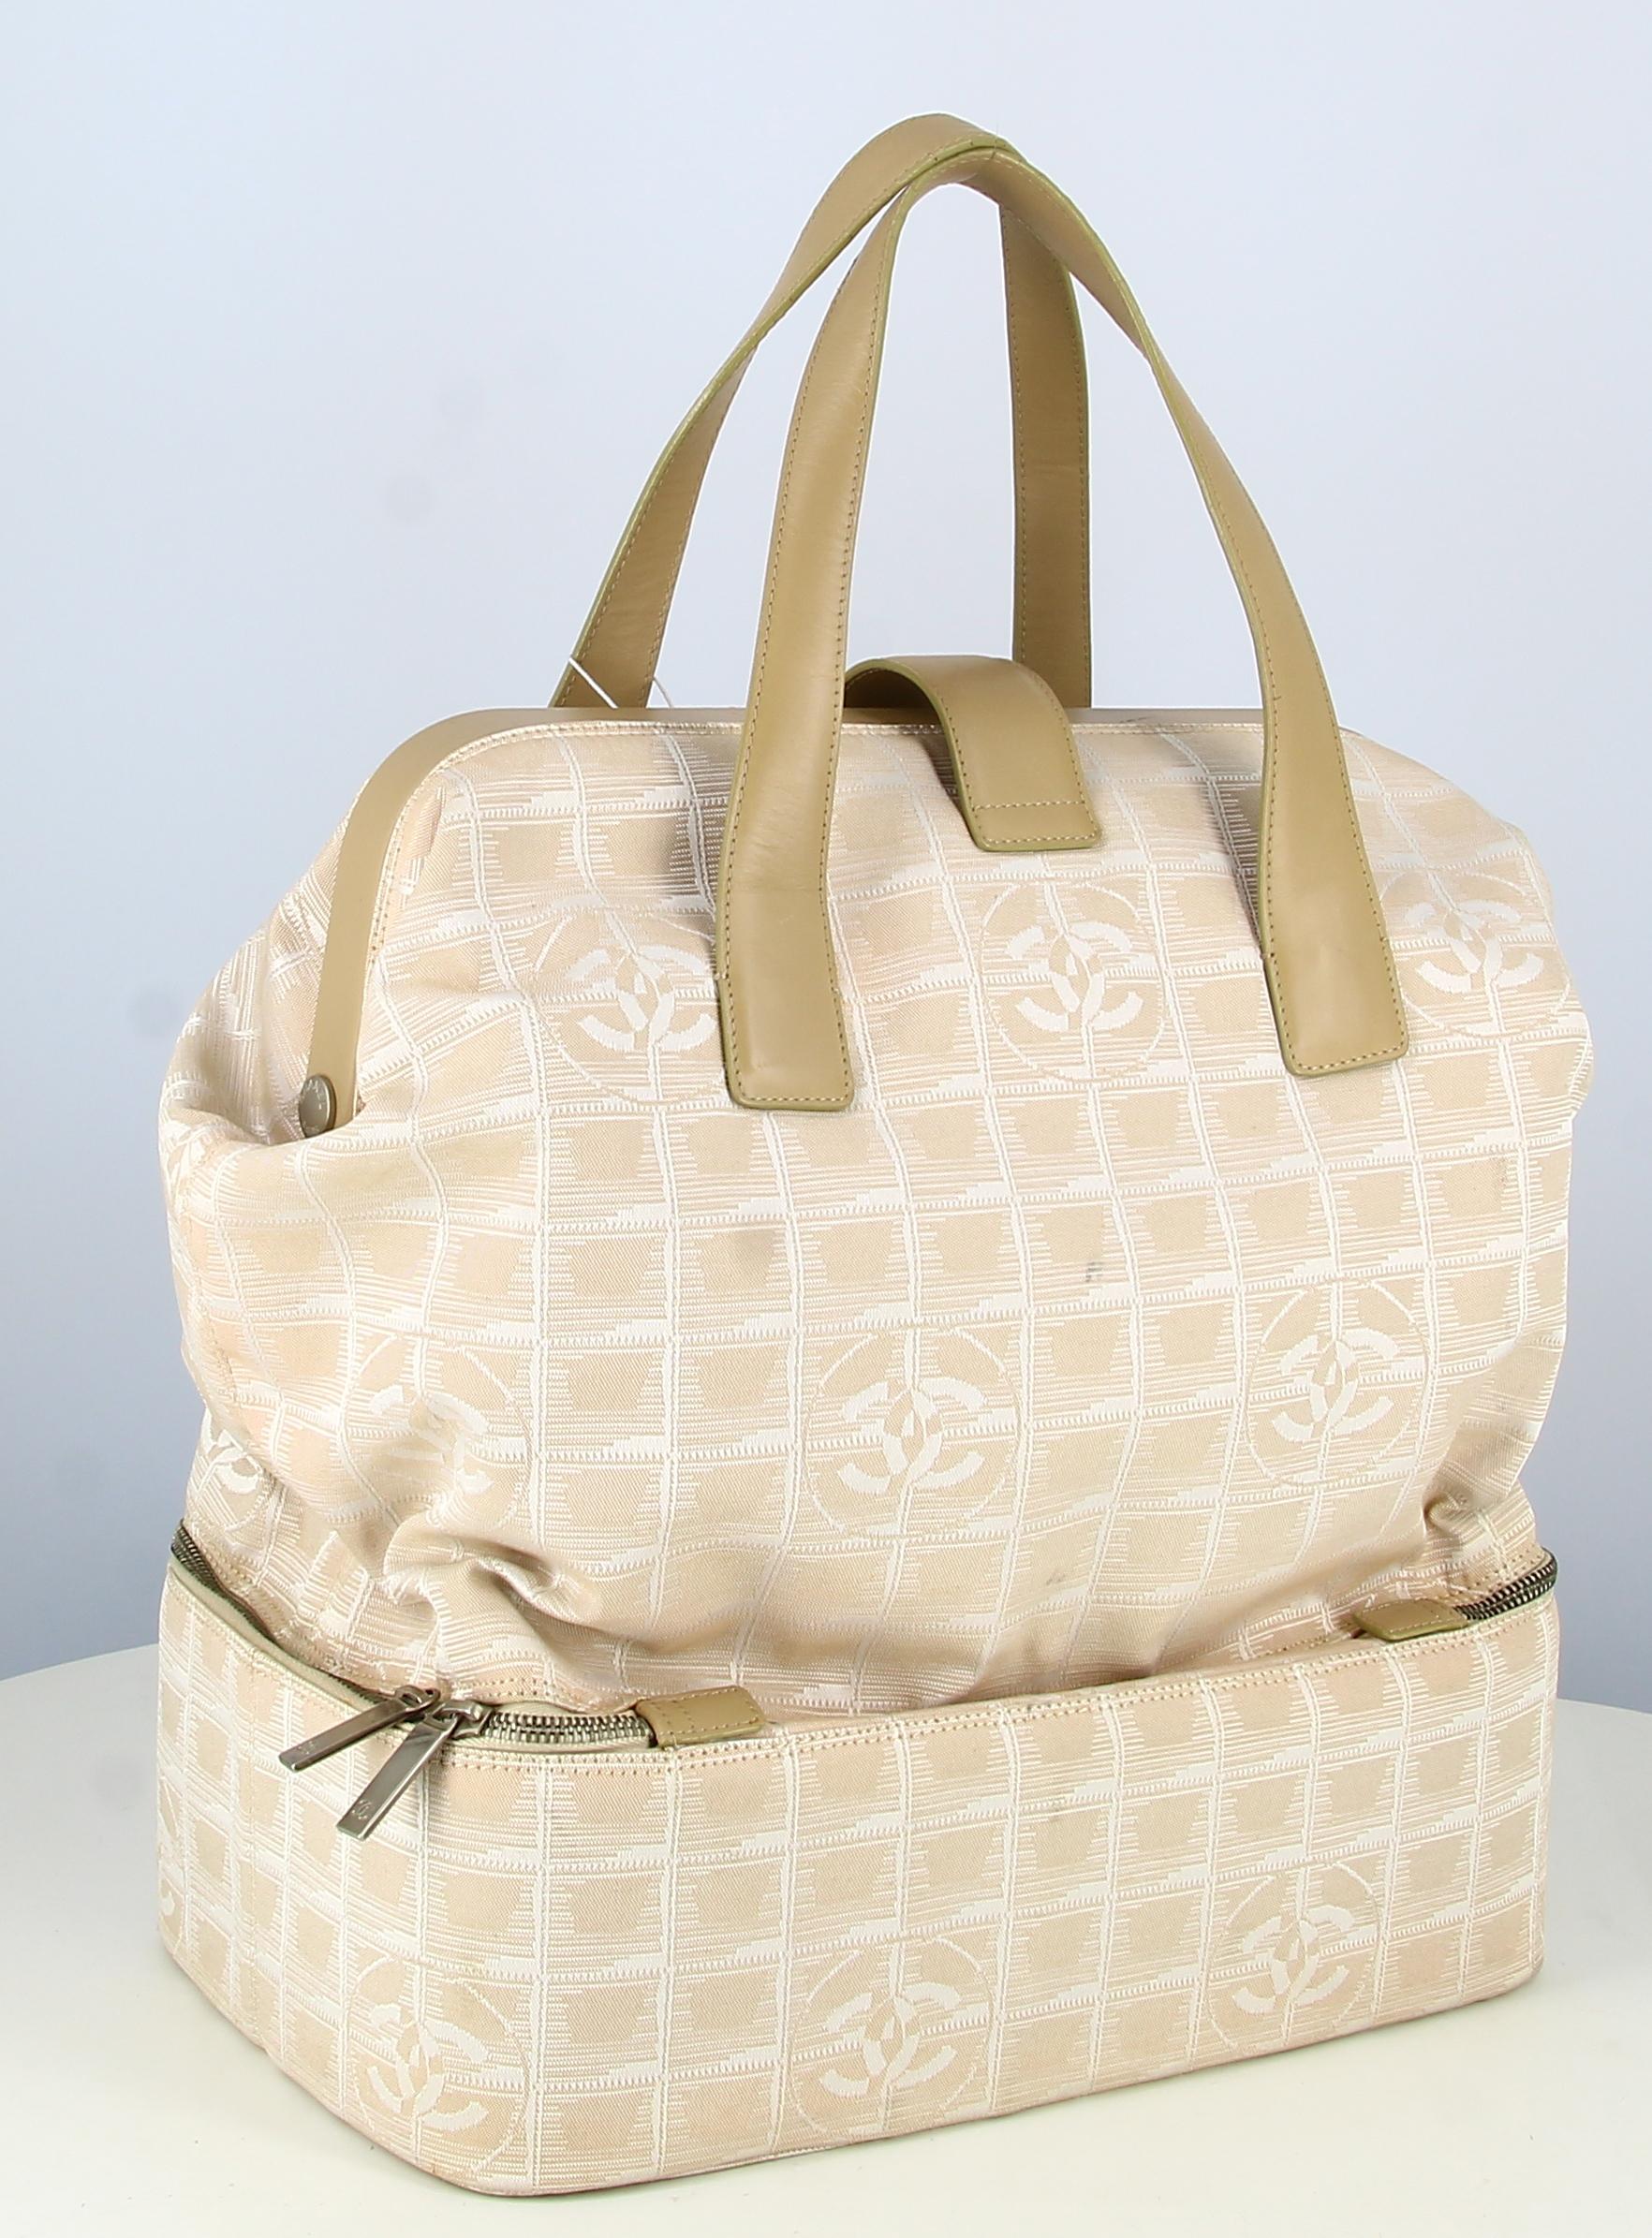 Women's or Men's 1999 Tote Bag Chanel Fabrics In Pink Monogram For Sale